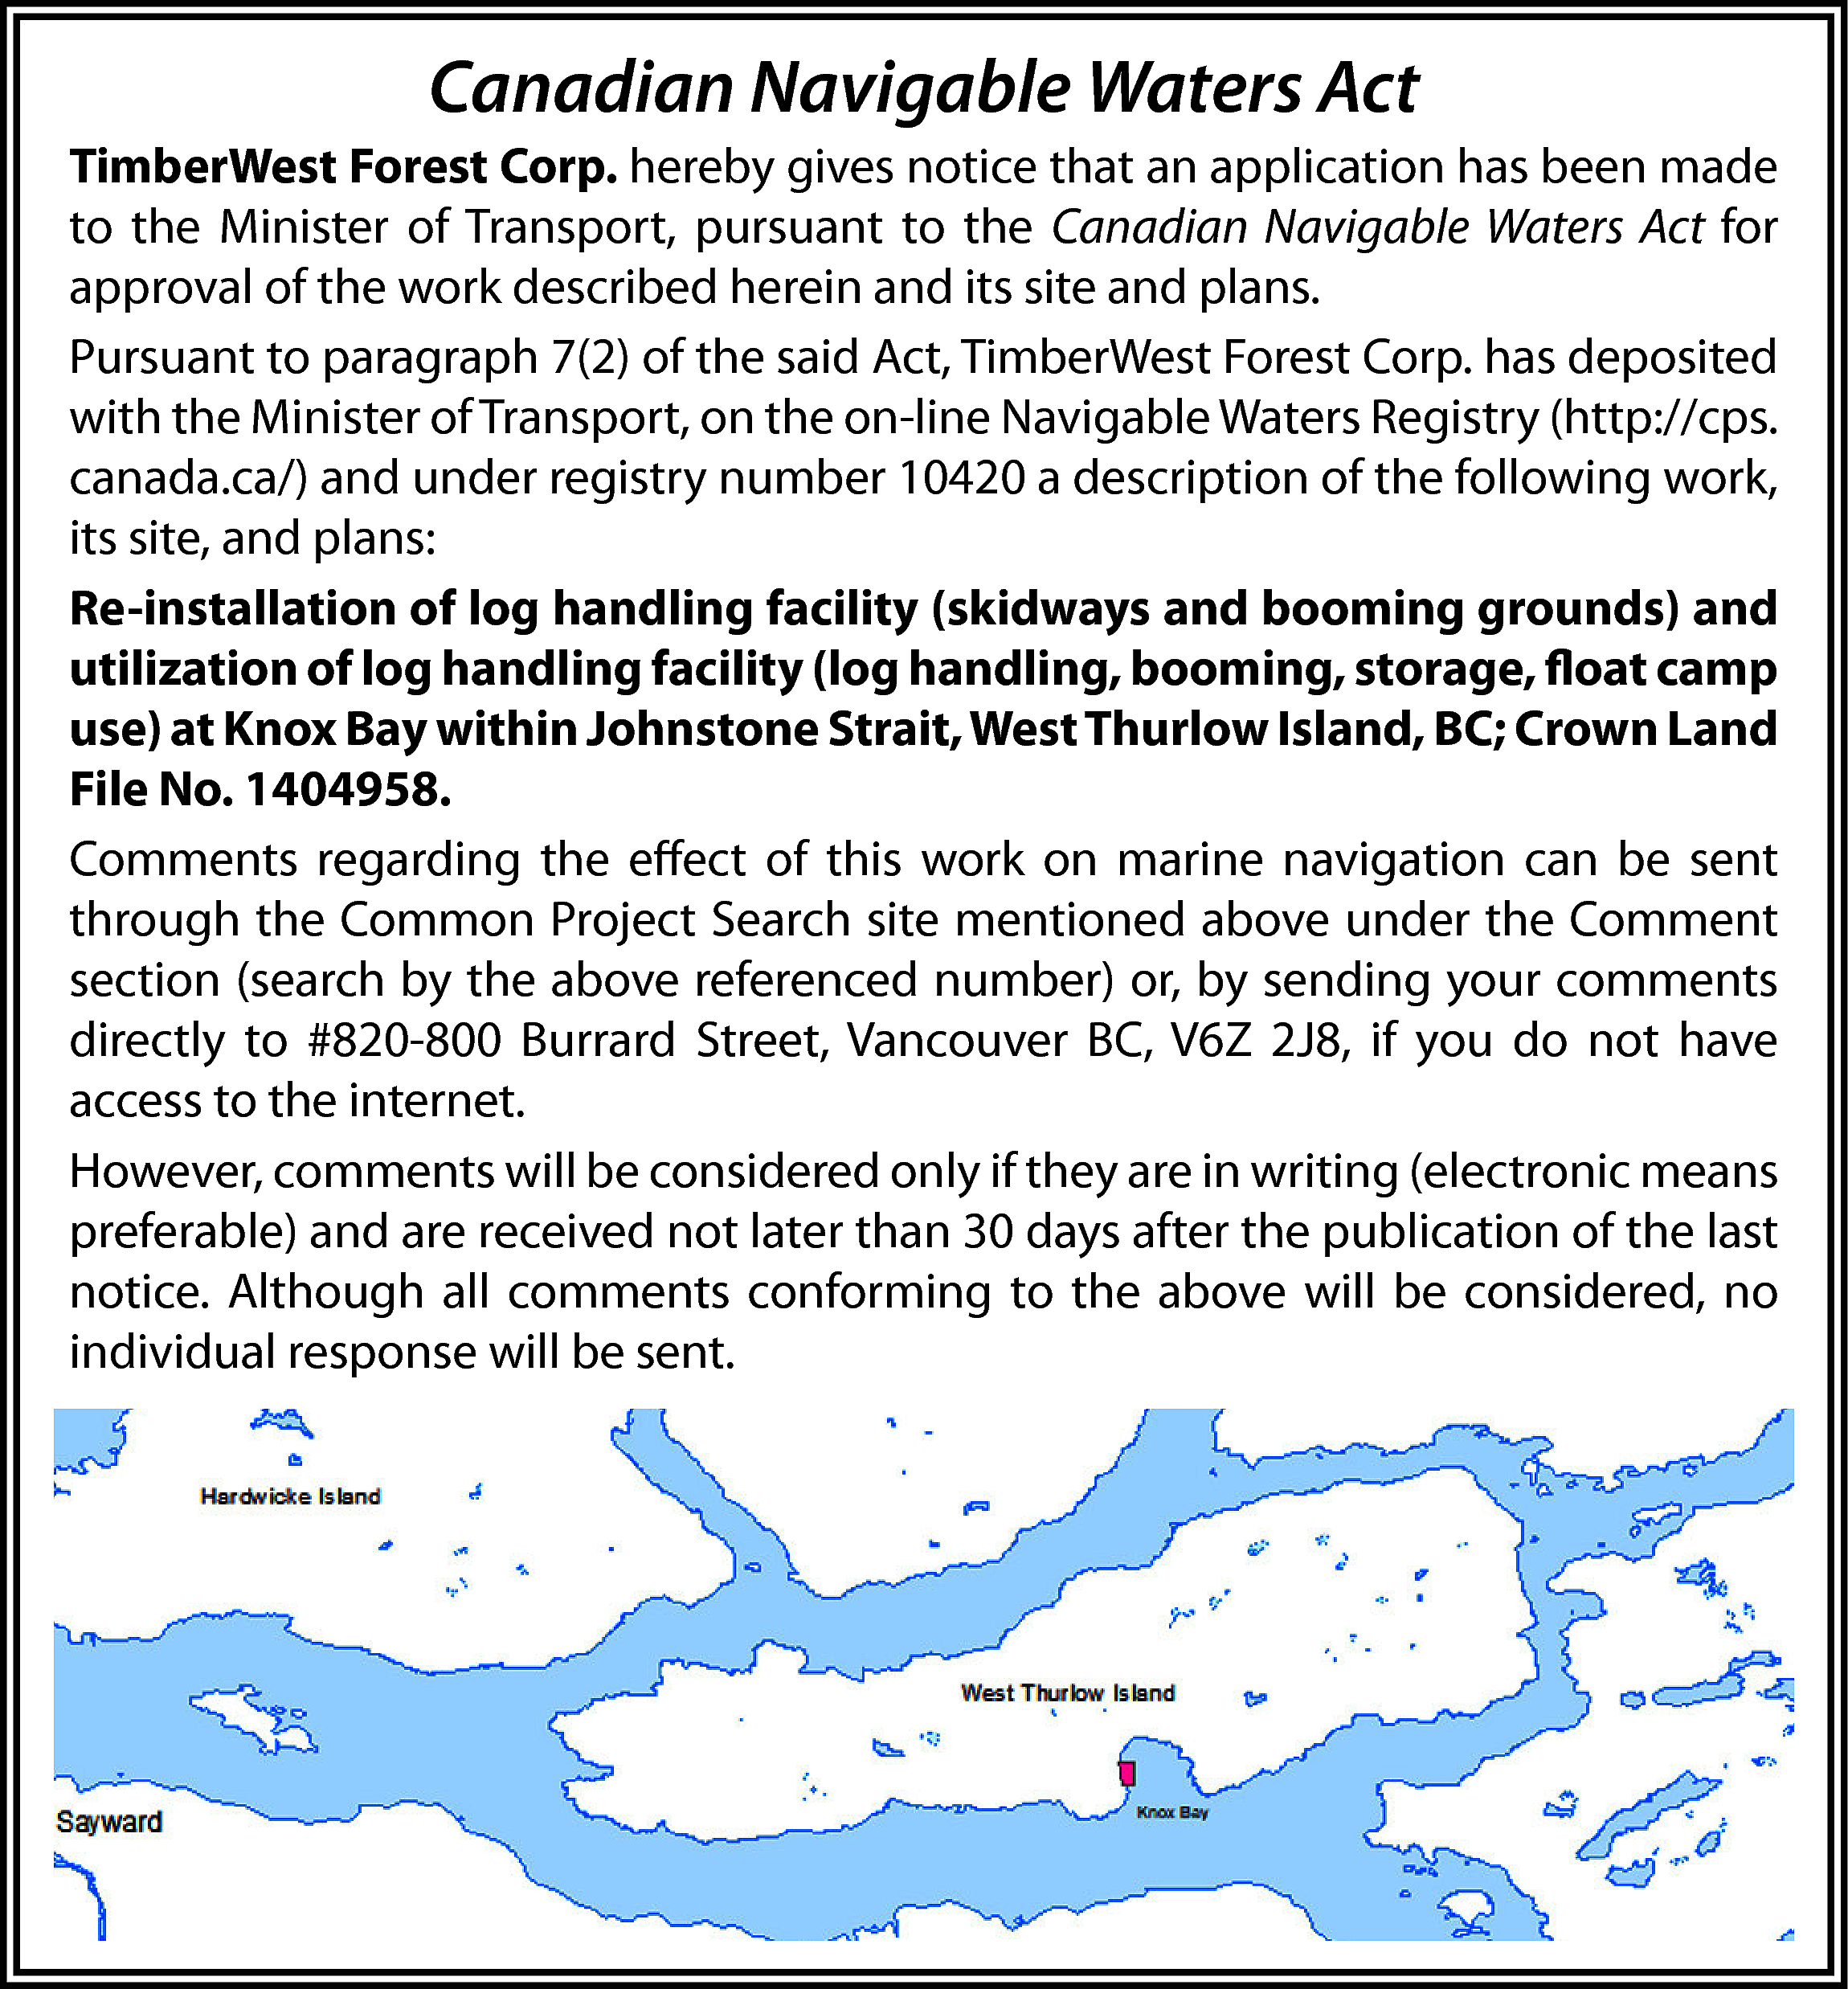 Canadian Navigable Waters Act <br>TimberWest  Canadian Navigable Waters Act  TimberWest Forest Corp. hereby gives notice that an application has been made  to the Minister of Transport, pursuant to the Canadian Navigable Waters Act for  approval of the work described herein and its site and plans.  Pursuant to paragraph 7(2) of the said Act, TimberWest Forest Corp. has deposited  with the Minister of Transport, on the on-line Navigable Waters Registry (http://cps.  canada.ca/) and under registry number 10420 a description of the following work,  its site, and plans:  Re-installation of log handling facility (skidways and booming grounds) and  utilization of log handling facility (log handling, booming, storage, float camp  use) at Knox Bay within Johnstone Strait, West Thurlow Island, BC; Crown Land  File No. 1404958.  Comments regarding the effect of this work on marine navigation can be sent  through the Common Project Search site mentioned above under the Comment  section (search by the above referenced number) or, by sending your comments  directly to #820-800 Burrard Street, Vancouver BC, V6Z 2J8, if you do not have  access to the internet.  However, comments will be considered only if they are in writing (electronic means  preferable) and are received not later than 30 days after the publication of the last  notice. Although all comments conforming to the above will be considered, no  individual response will be sent.    